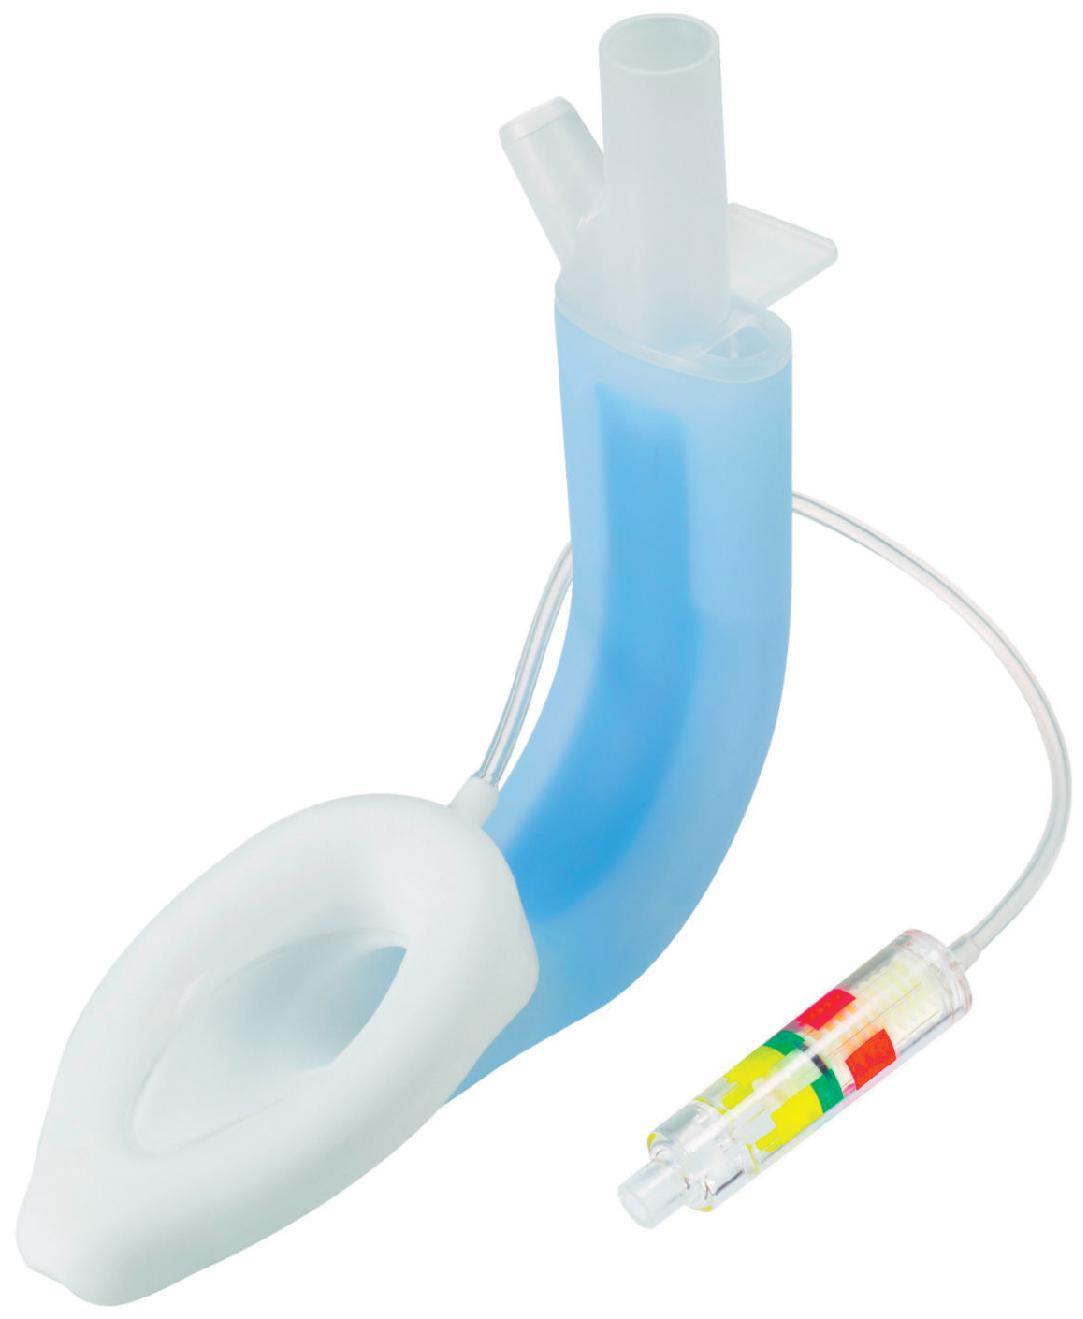 Fig. 19.6, The LMA Protector, a silicone, single-use device incorporating features of many earlier LMAs. It has a relatively large central airway tube and two lateral drain tubes. The cuff incorporates a “traffic light” system that enables continuous monitoring of cuff pressure during use. (Teleflex Medical Europe Ltd., Athlone, Ireland.)